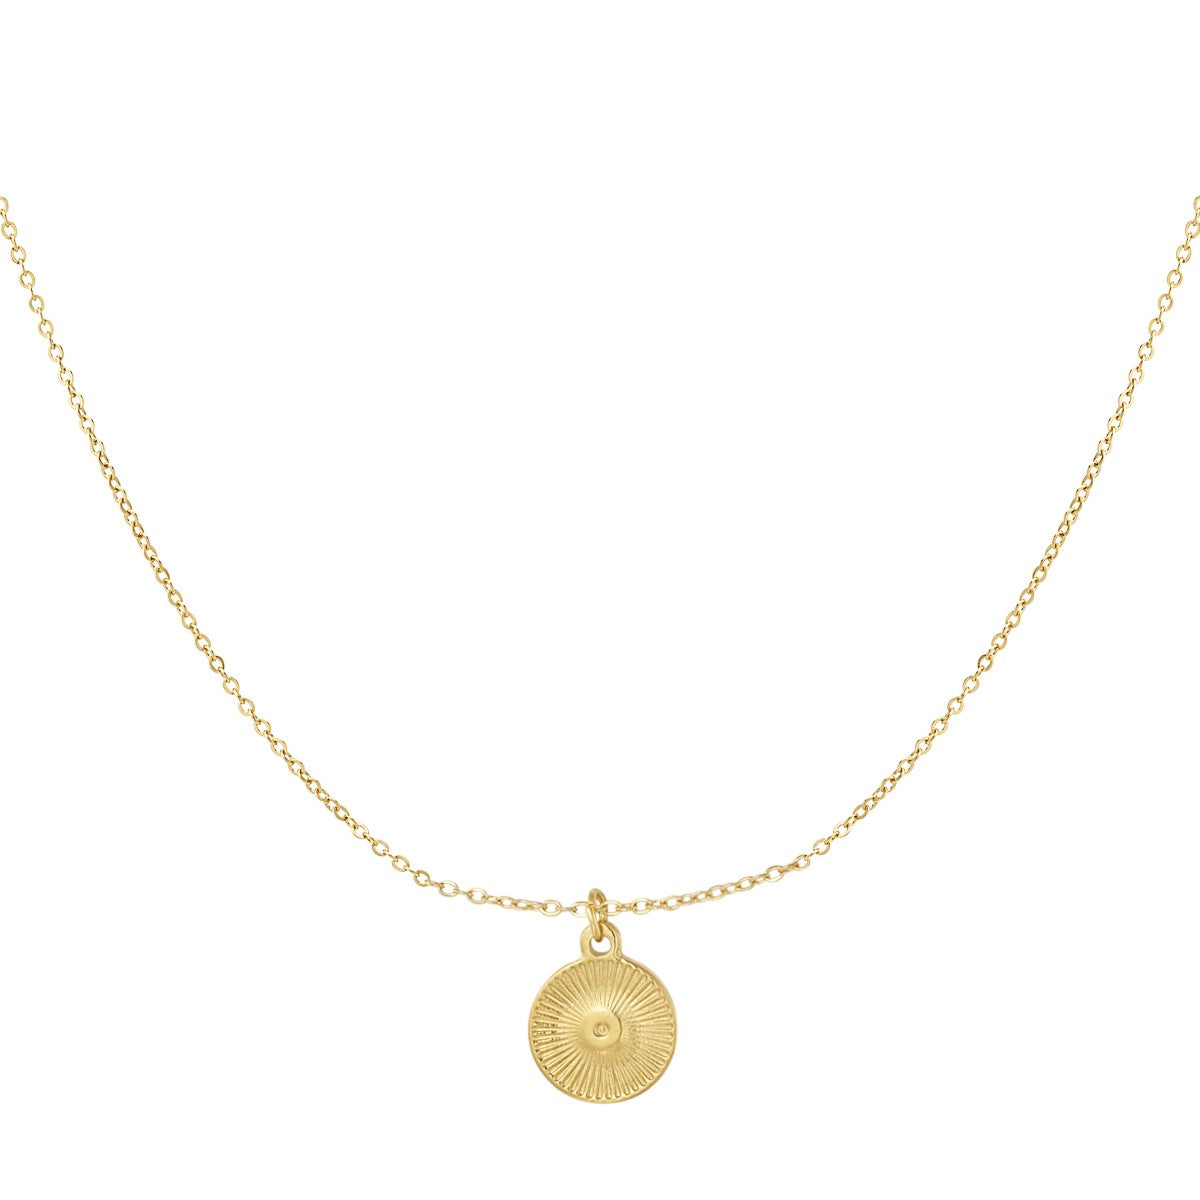 Necklace classic coin